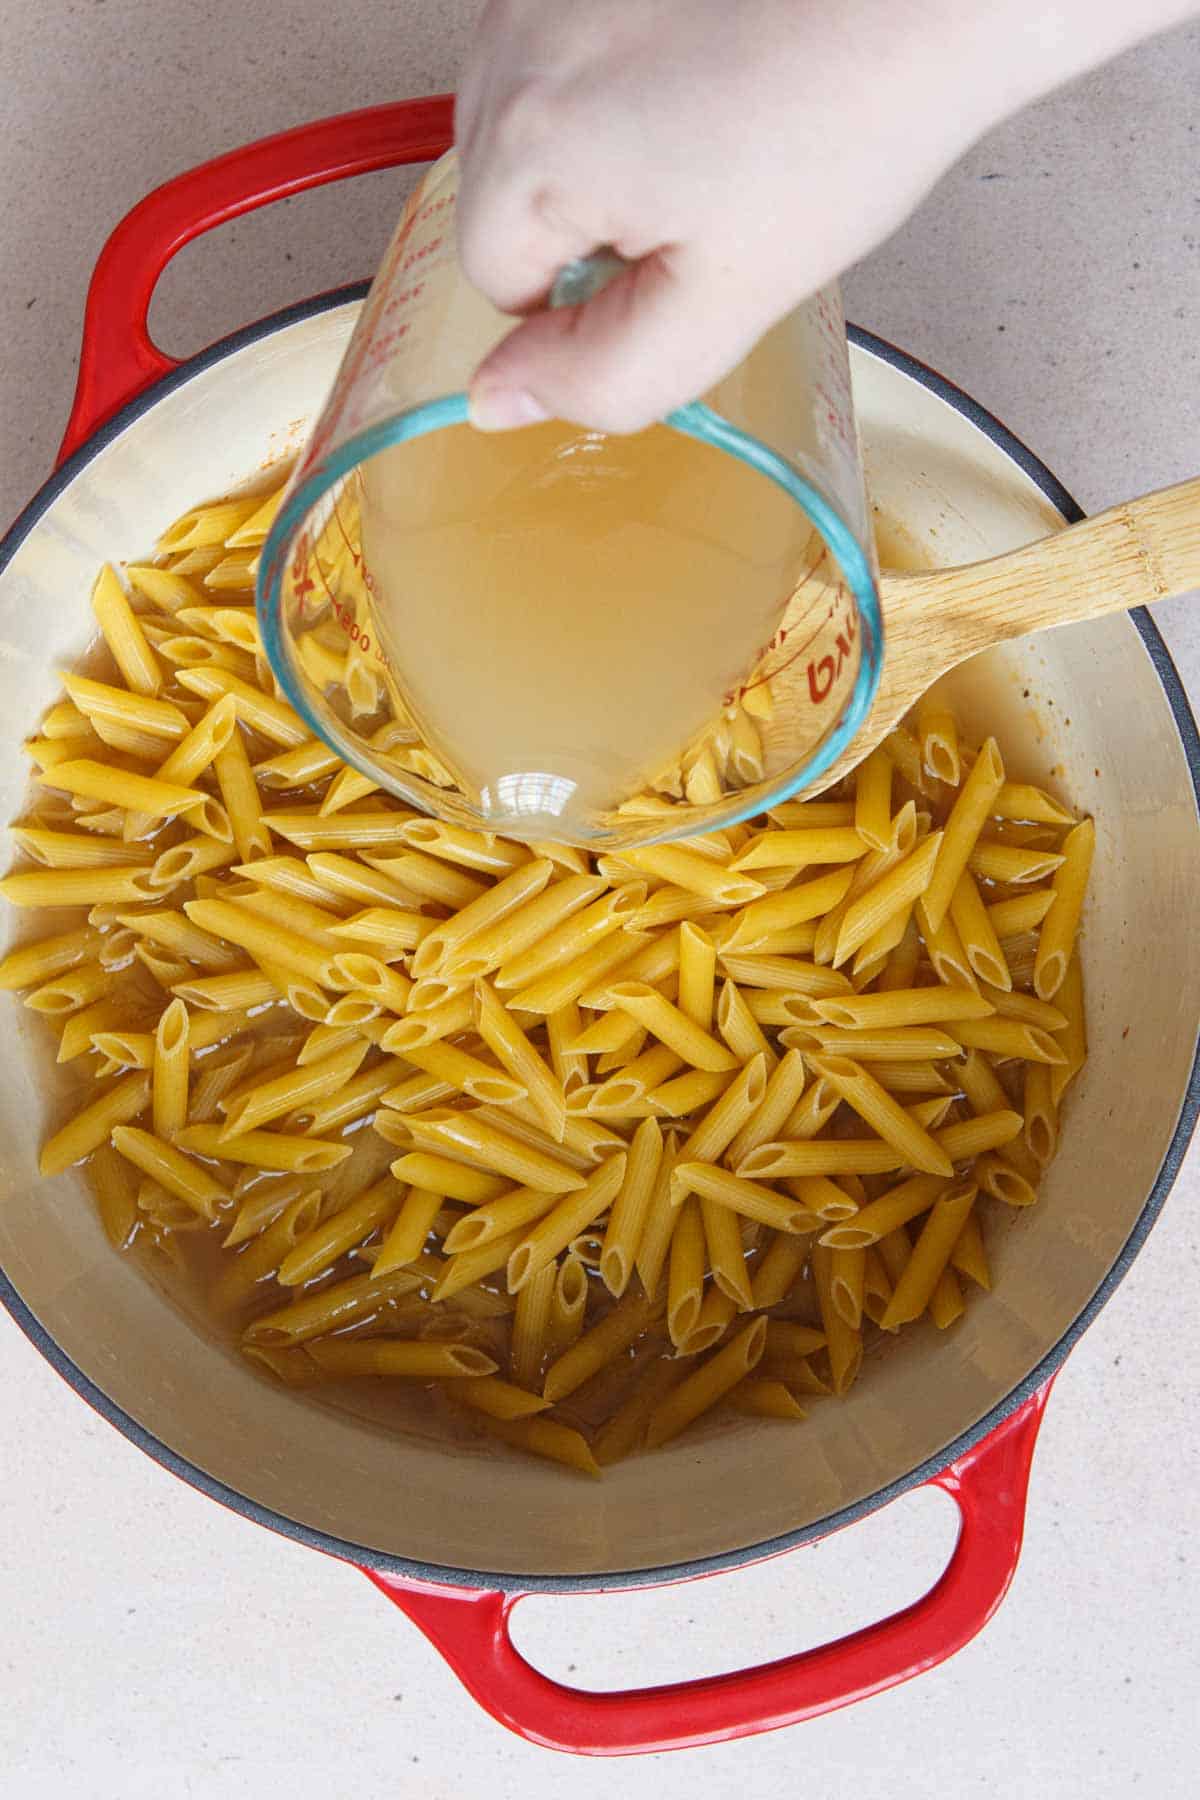 Pouring broth into the pot over the penne